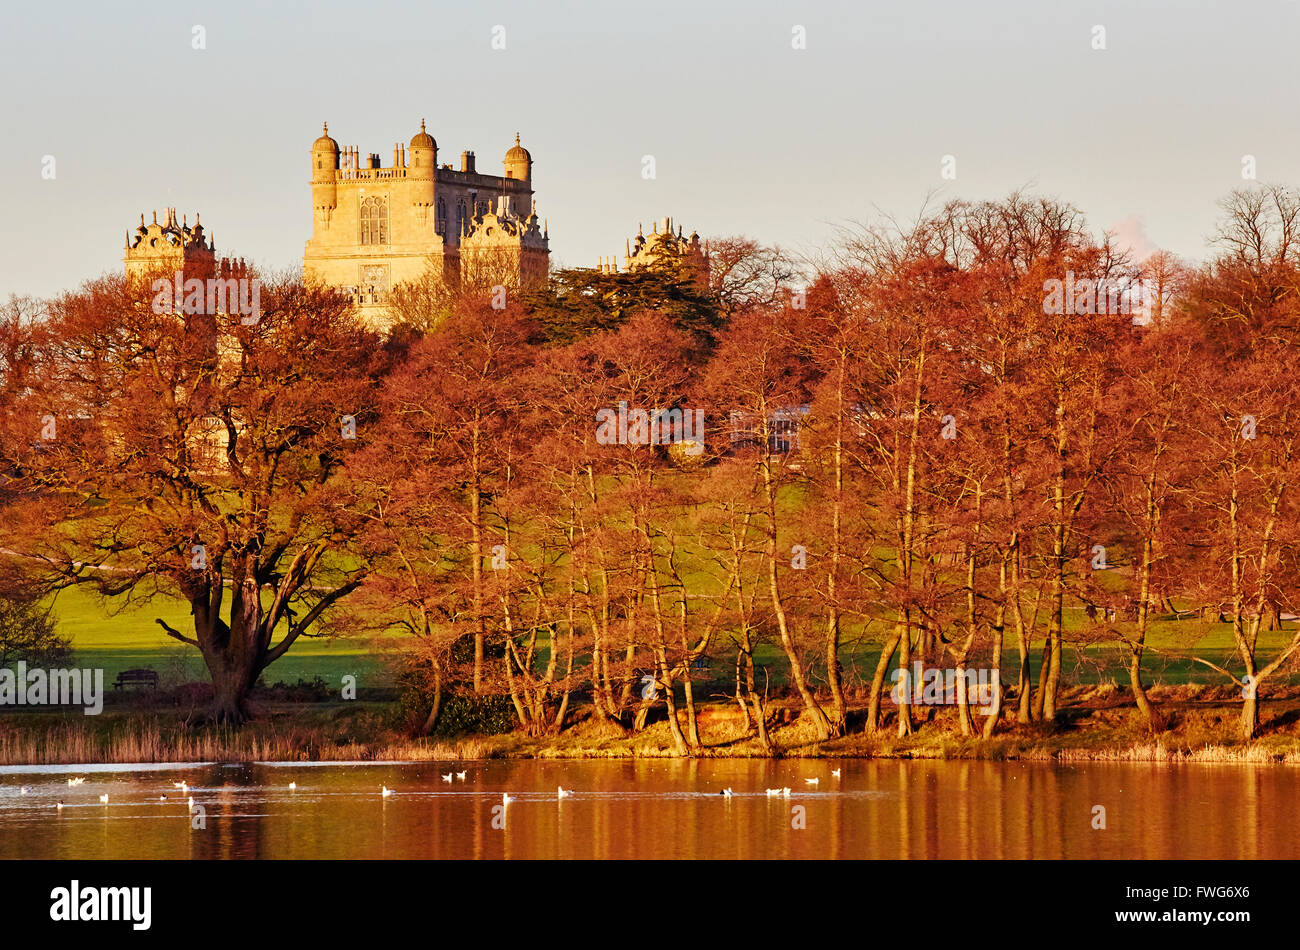 View of Wollaton Hall from the lake in the grounds, Nottingham, England, UK. Stock Photo